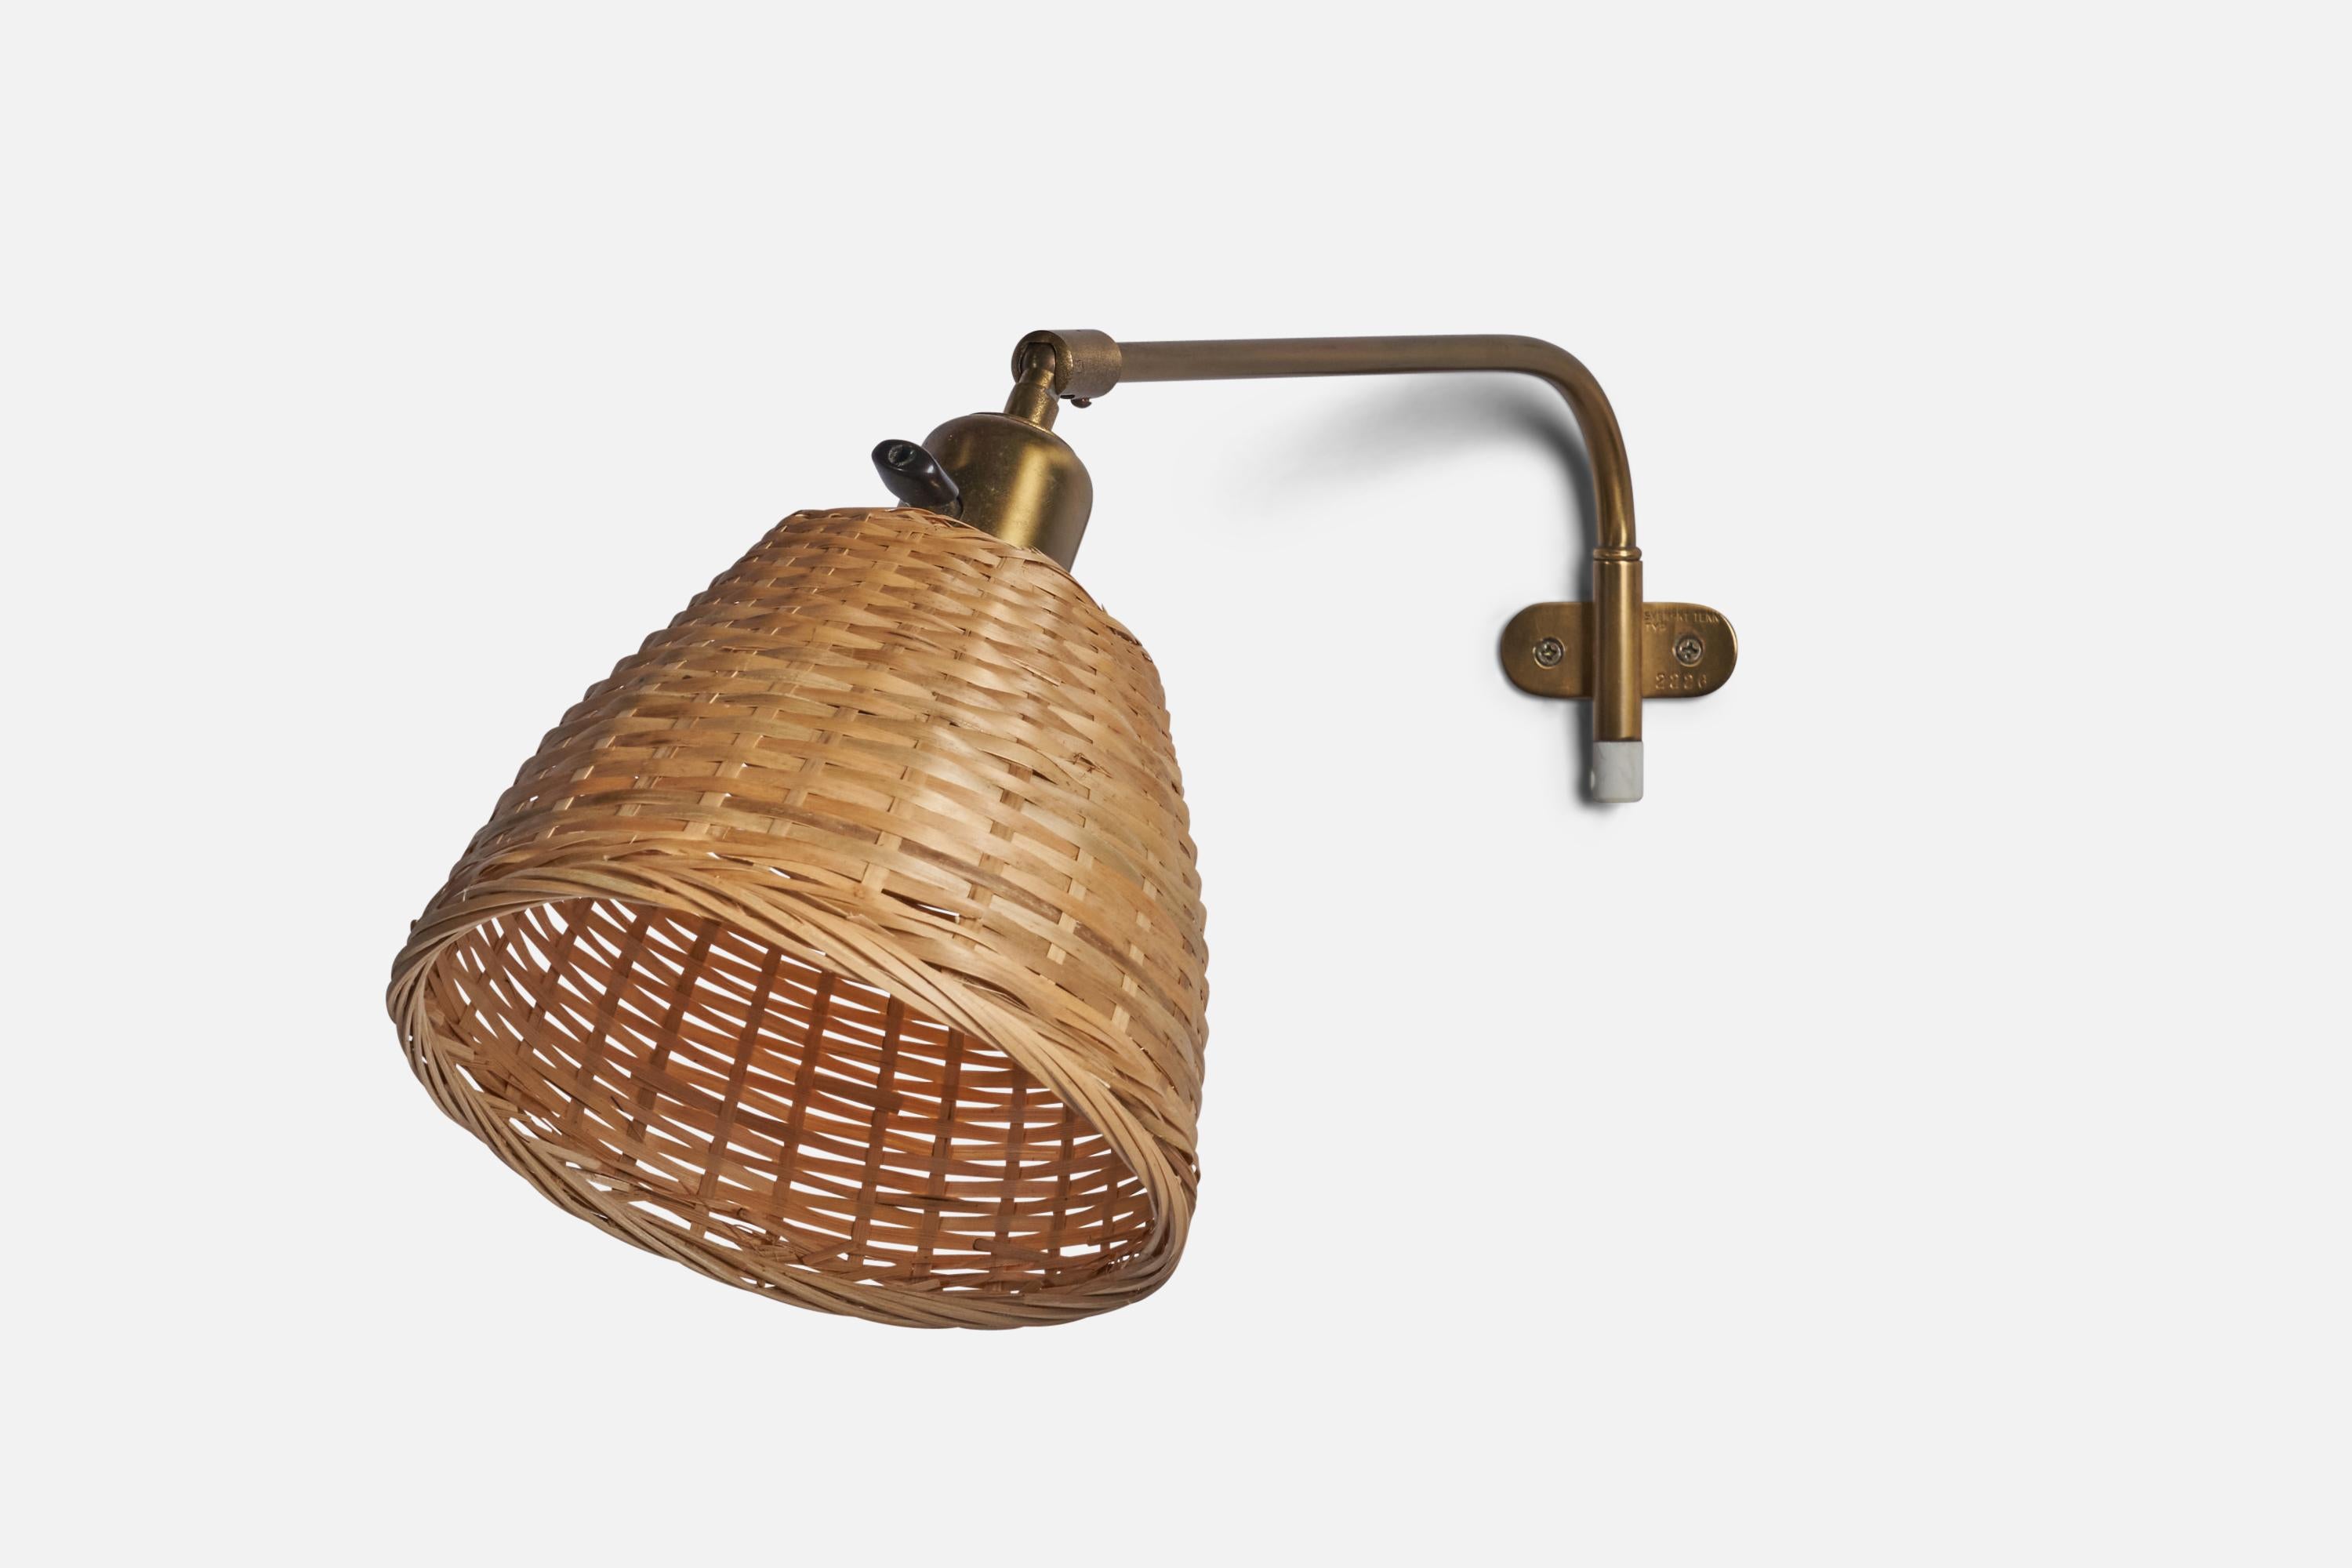 An adjustable brass and rattan wall light designed and produced in Sweden, 1950s.

Configured for plug-in with cord feeding from bottom of stem.

Overall Dimensions (inches): 20” H x 7” W x 9” D
Back Plate Dimensions (inches): 0.95” H x 2.3” W 
Bulb